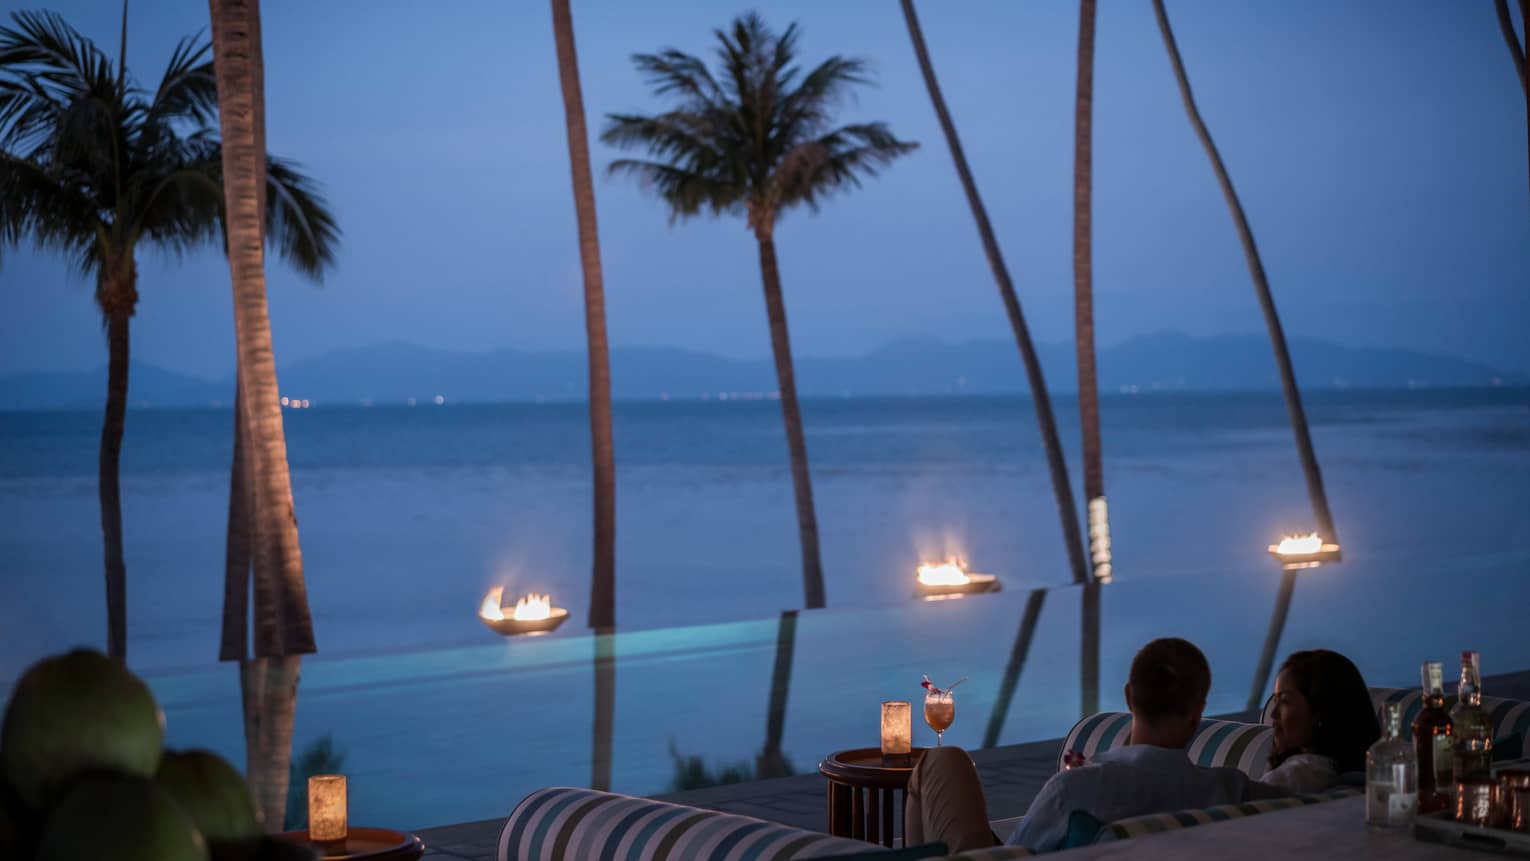 CoCoRum patrons look out at tall palm trees, outdoor fireplace line infinity pool in front of ocean at night